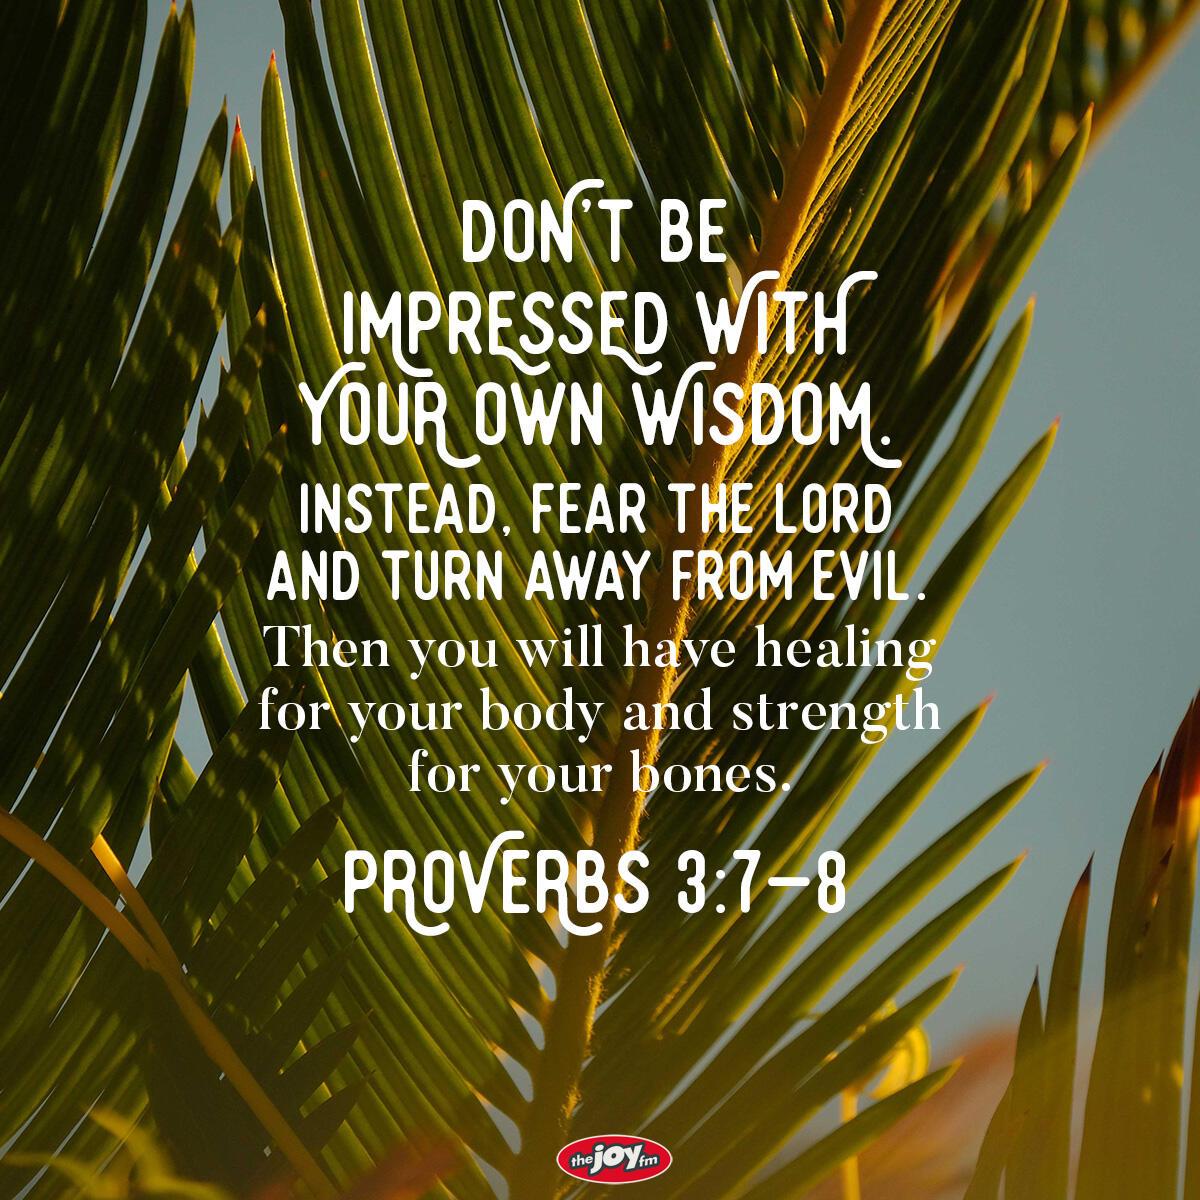 Proverbs 3:7-8 - Verse of the Day